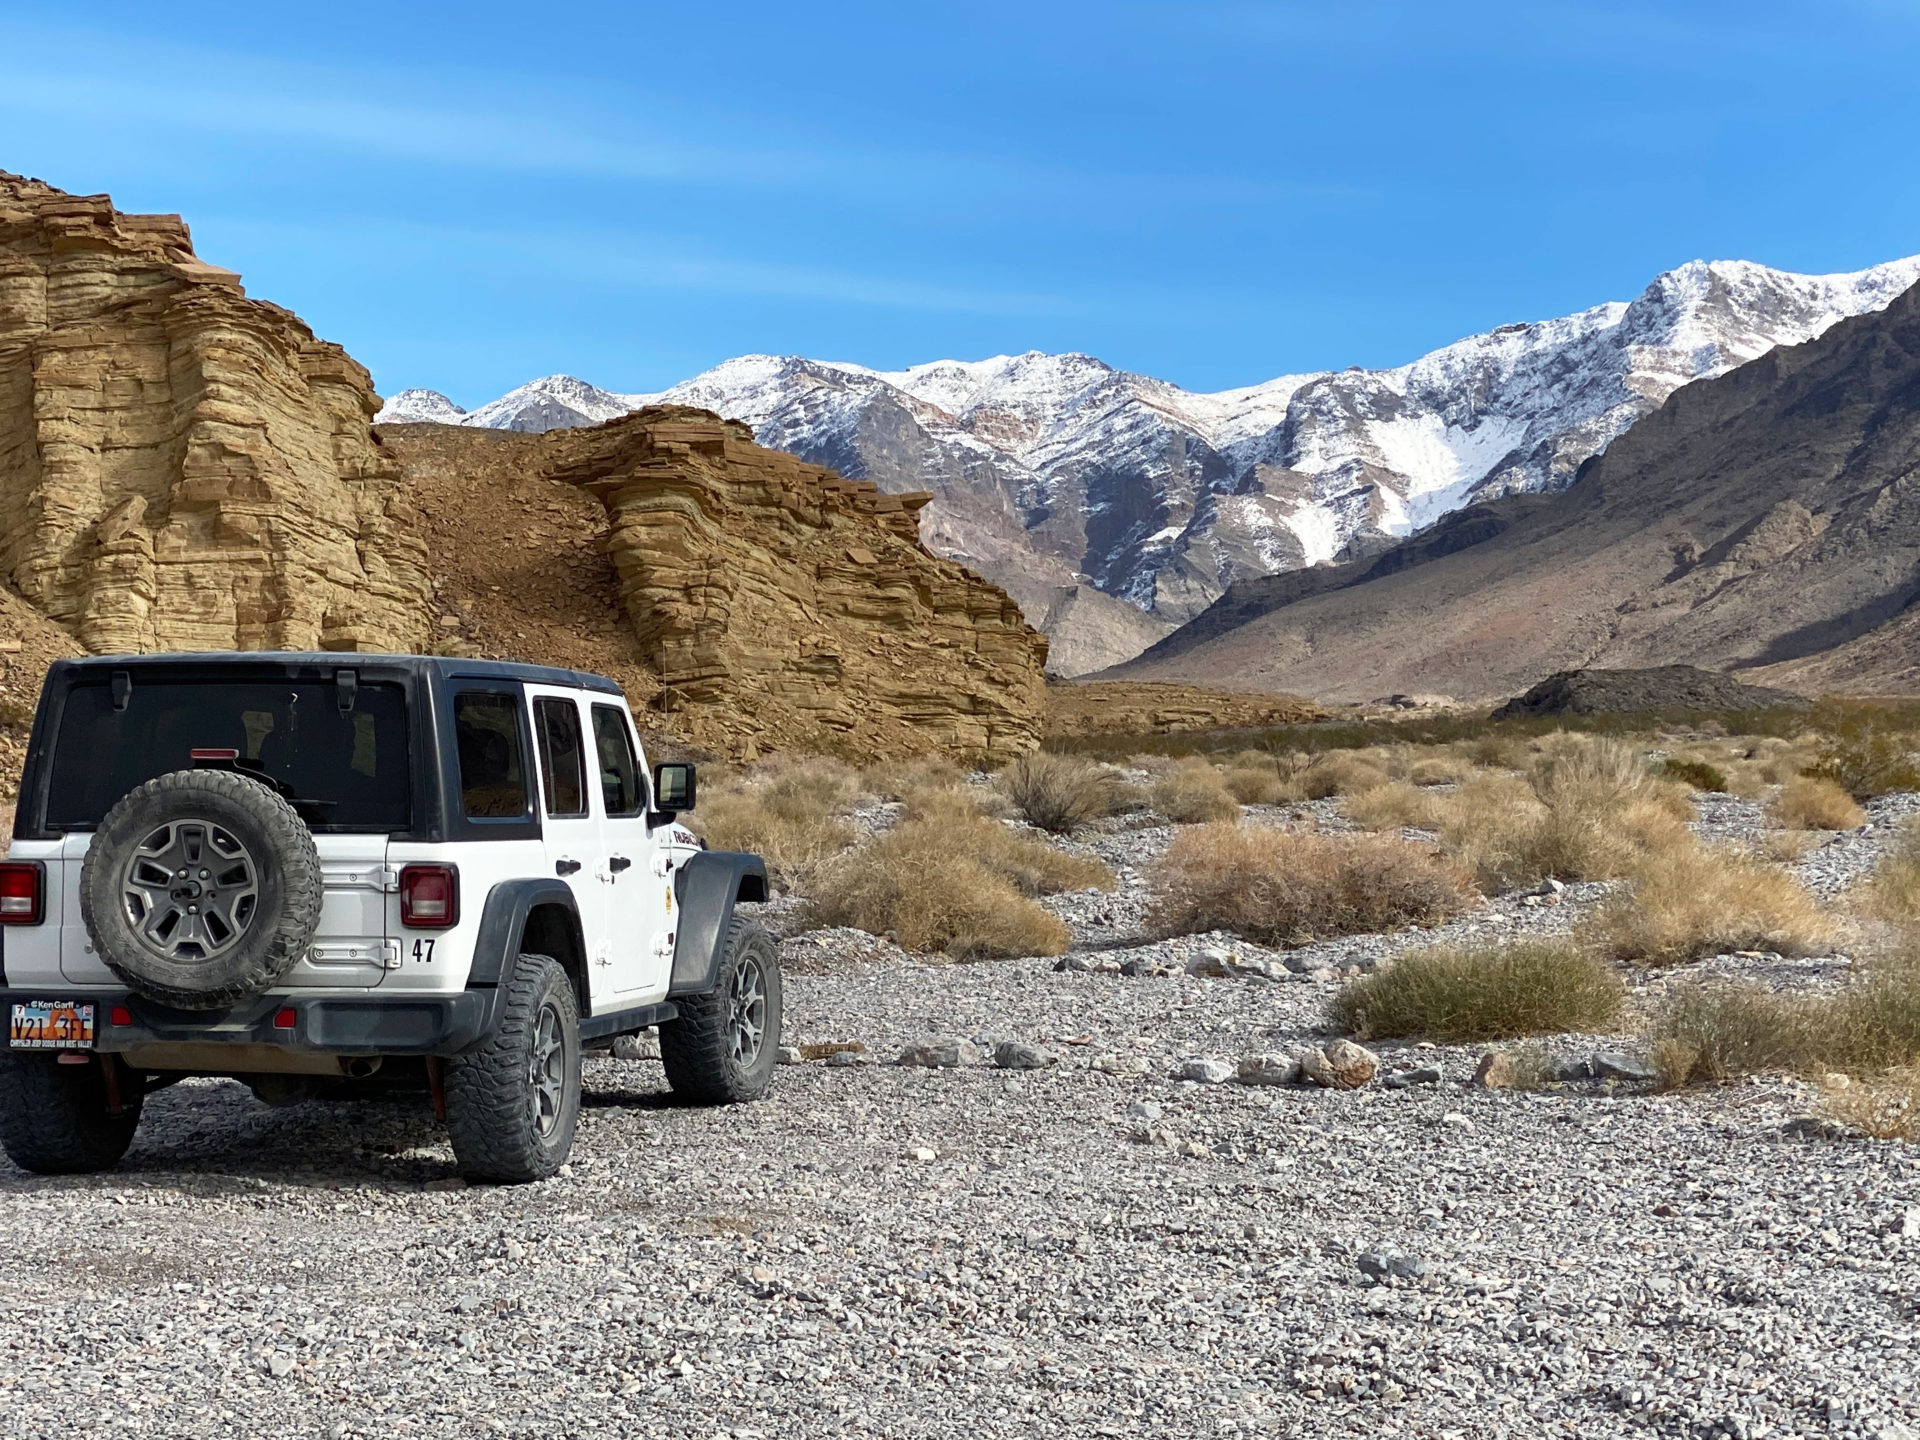 A white Jeep Rubicon parked in front of the camera while Death Valley's surreal and stark desert landscape characterized by vast salt flats, towering sand dunes, and rugged mountains is seen in the background